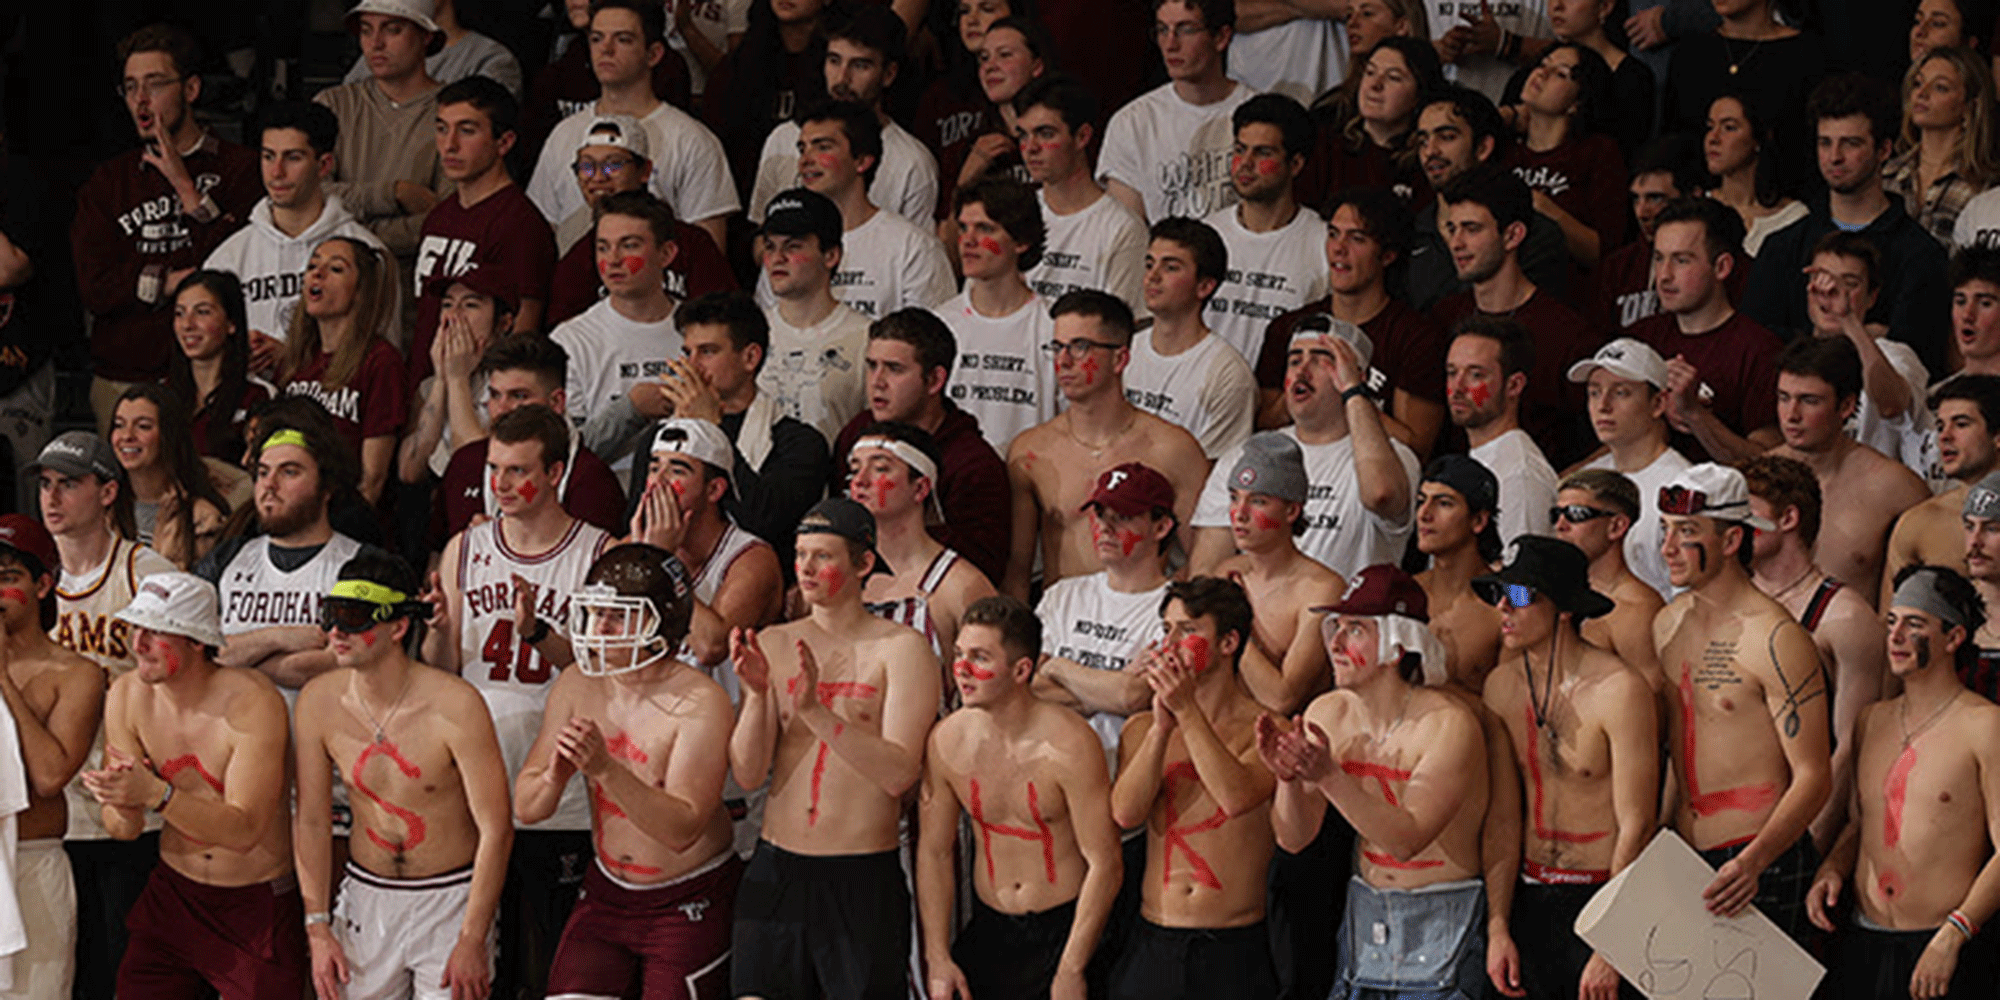 Fordham gymnasium, stands filled with fans cheering. In forefront are shirtless men, with letters written on their stomachs.